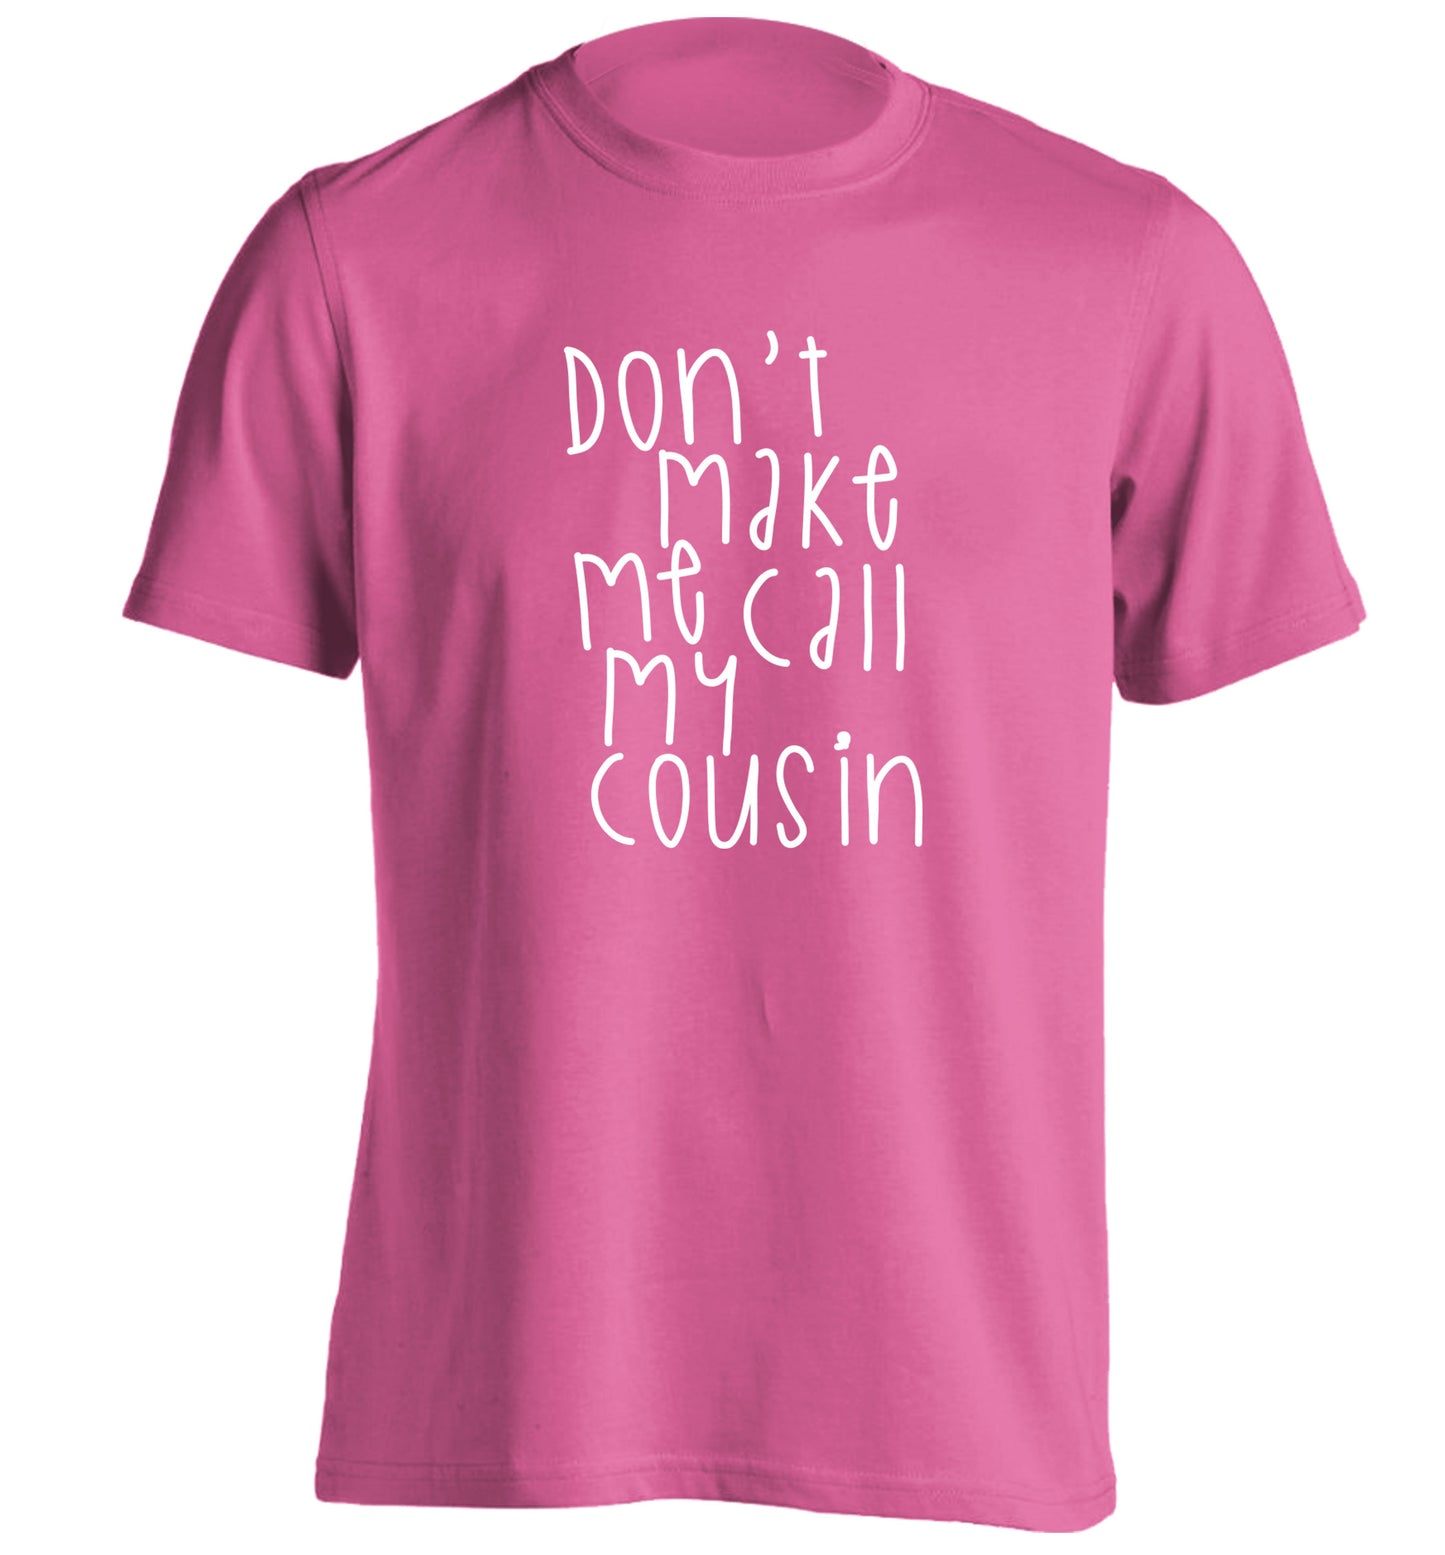 Don't make me call my cousin adults unisex pink Tshirt 2XL